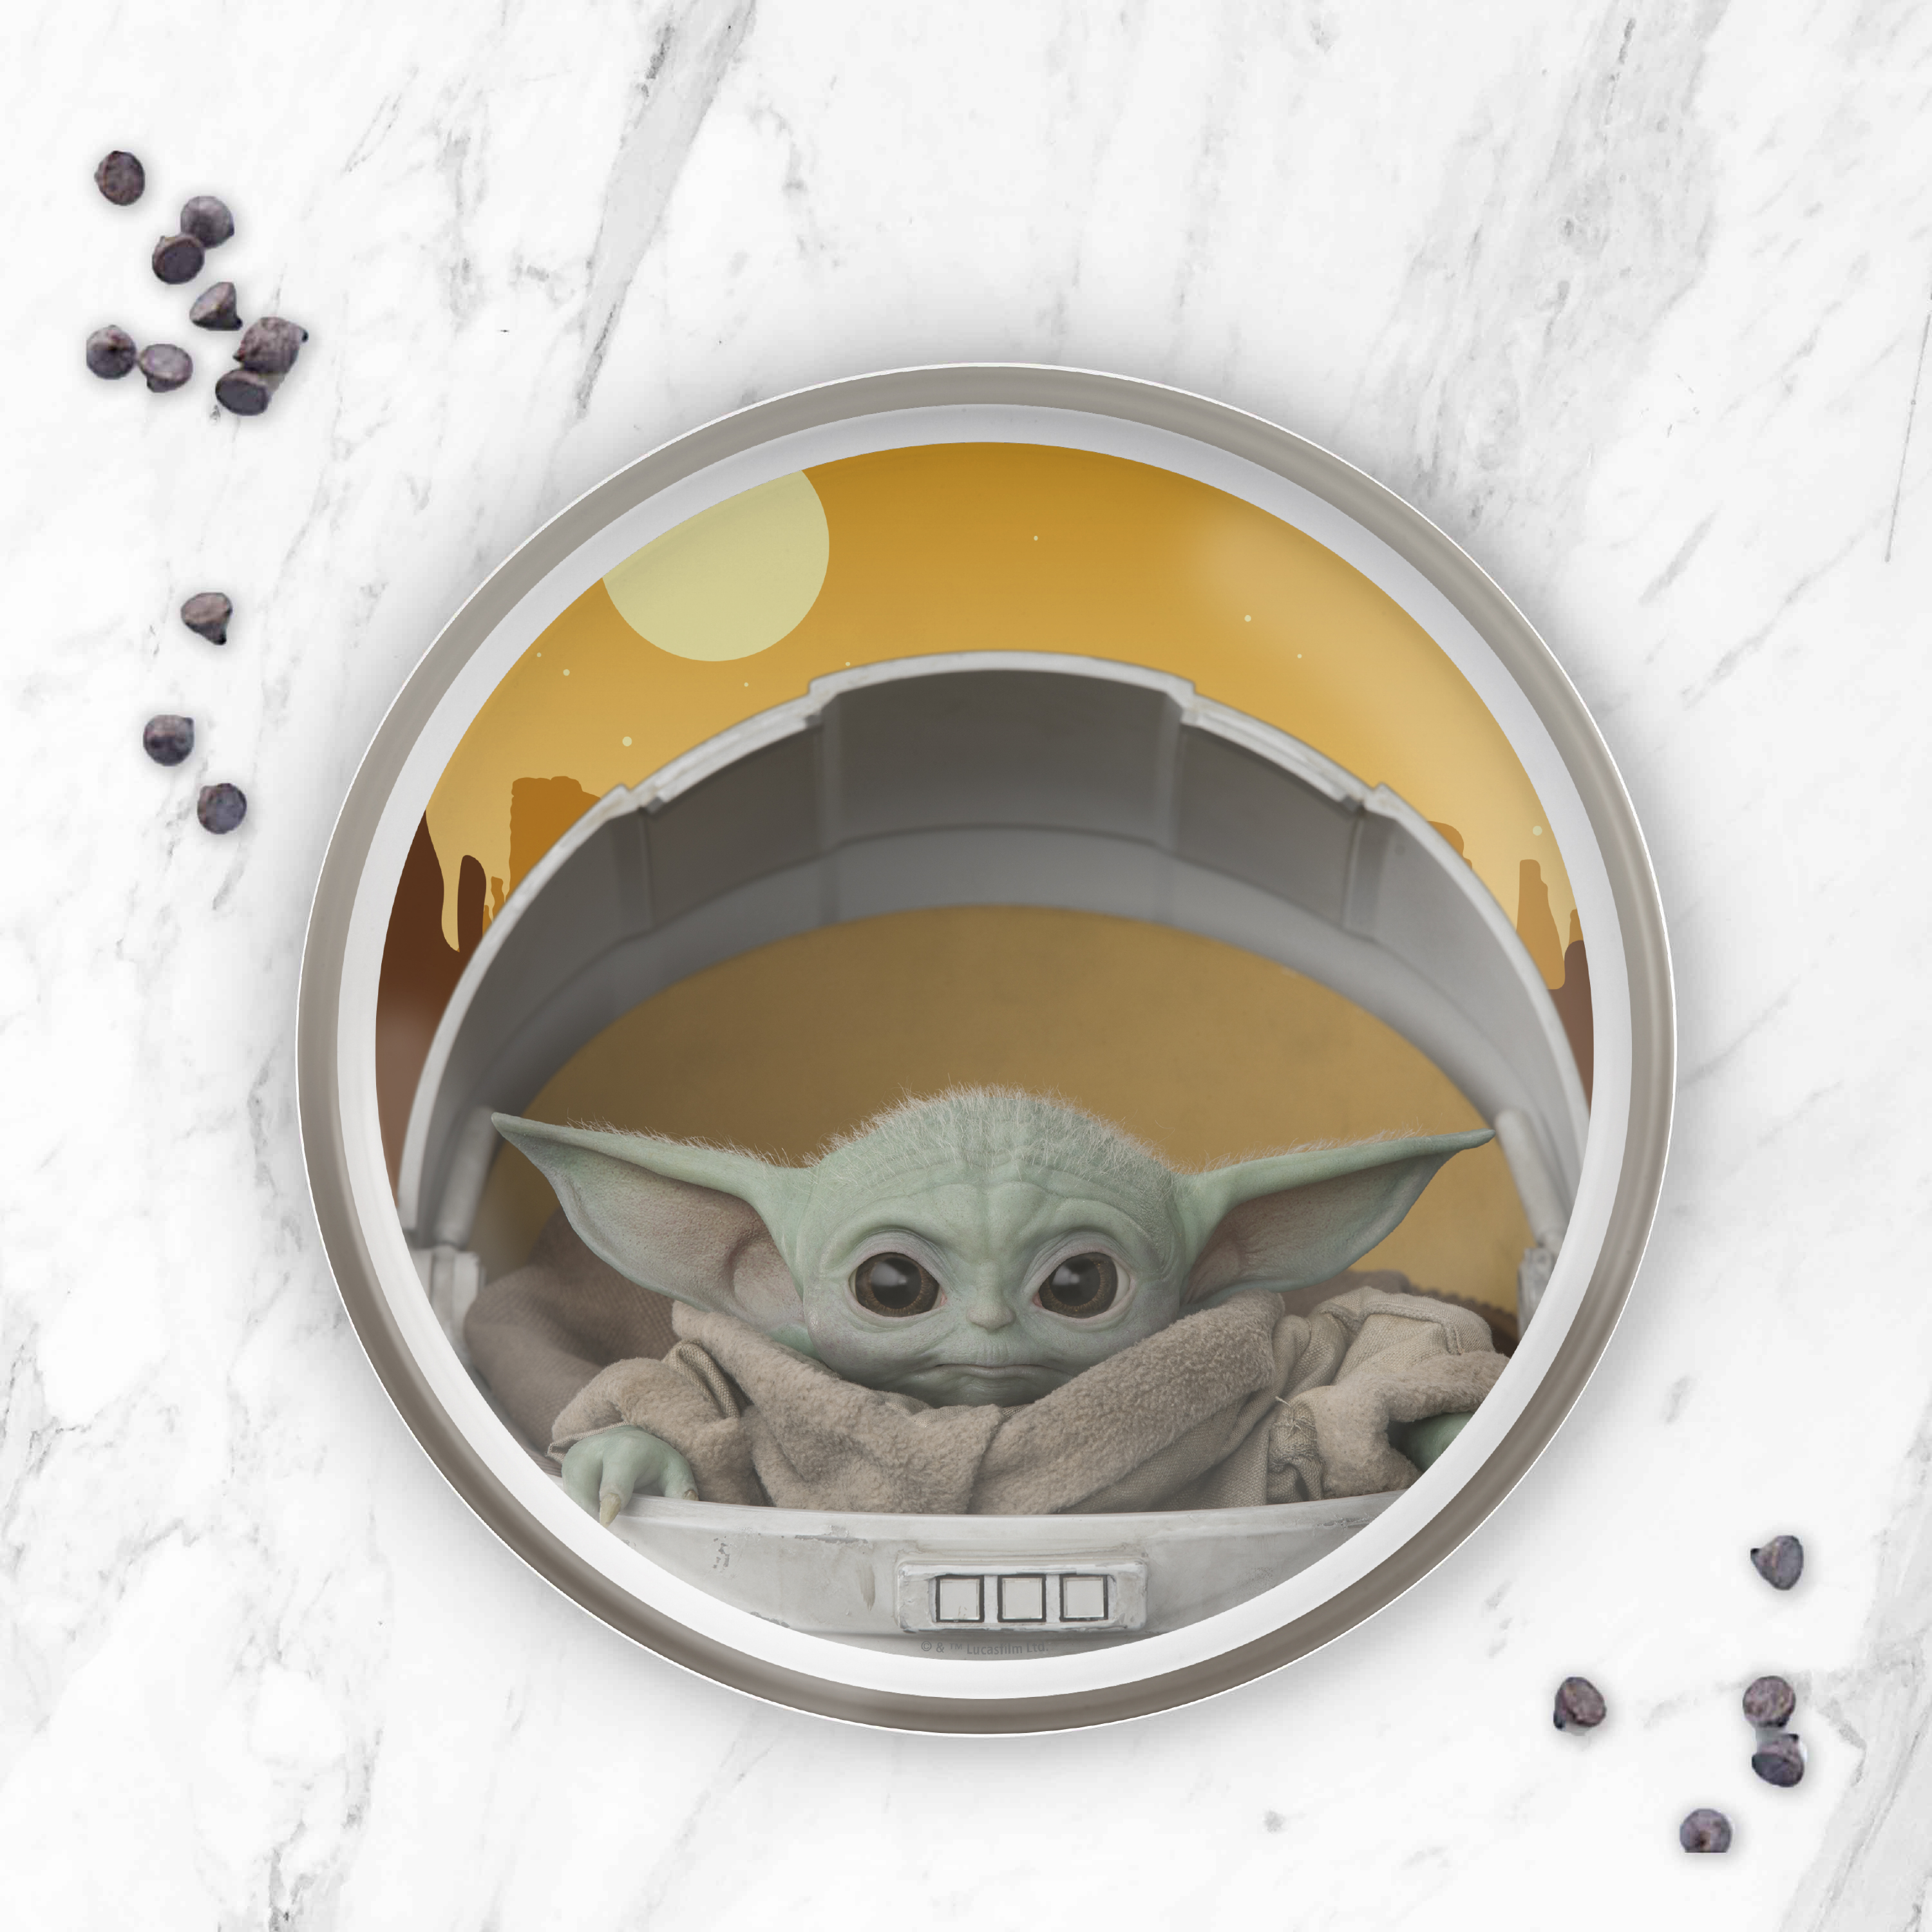 Star Wars: The Mandalorian Plate, Bowl and Water Bottle, The Child (Baby Yoda), 3-piece set slideshow image 5